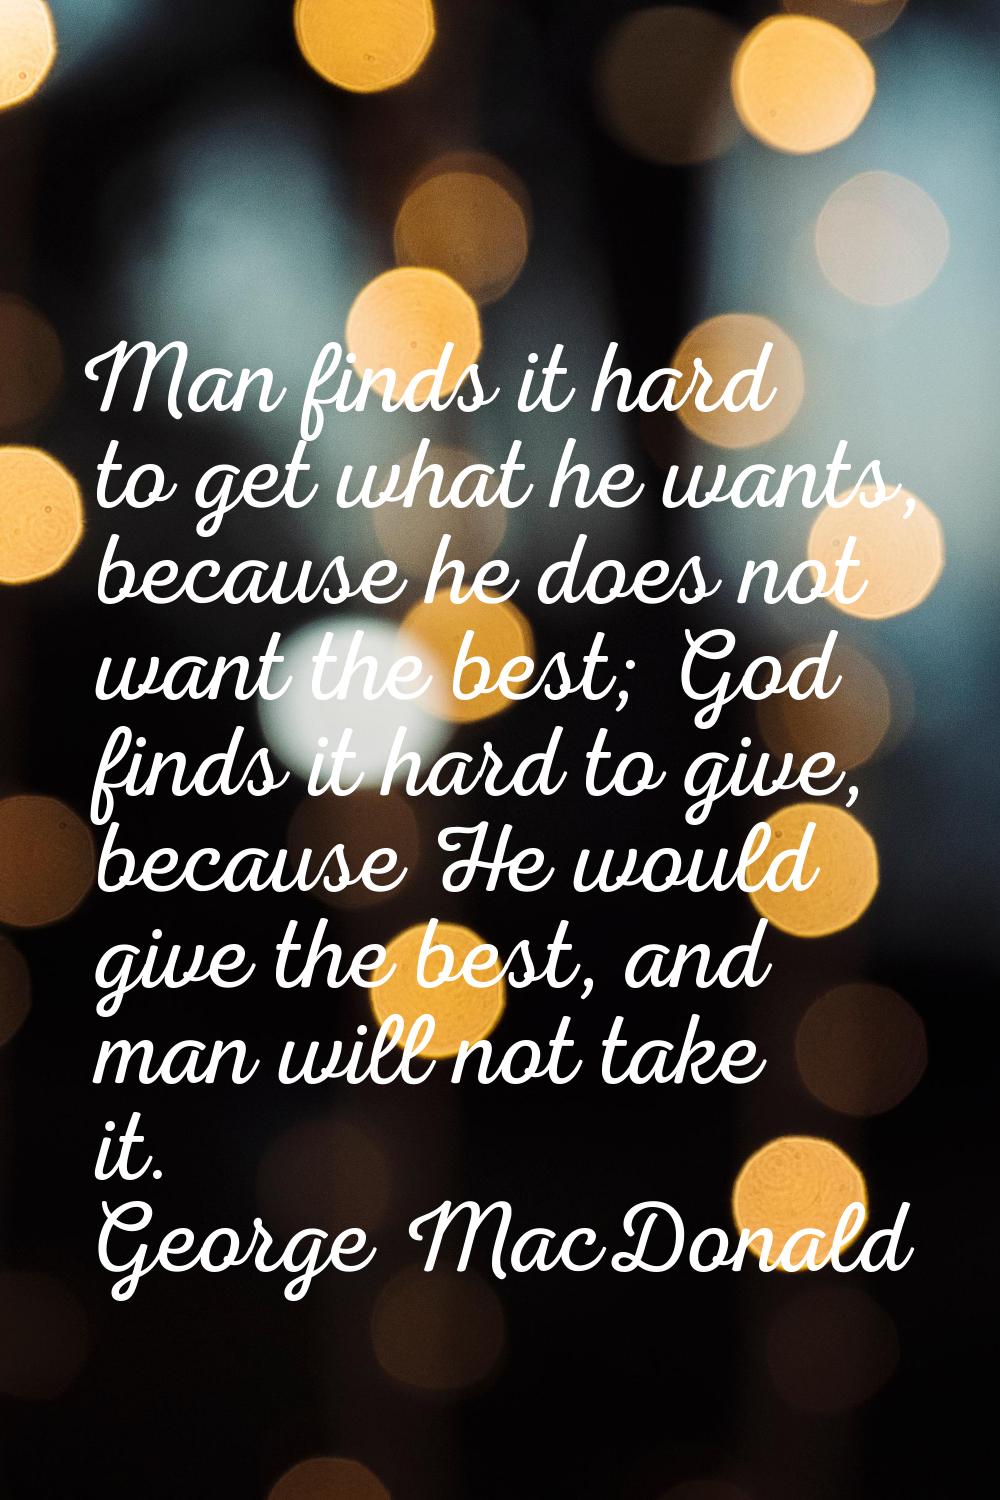 Man finds it hard to get what he wants, because he does not want the best; God finds it hard to giv